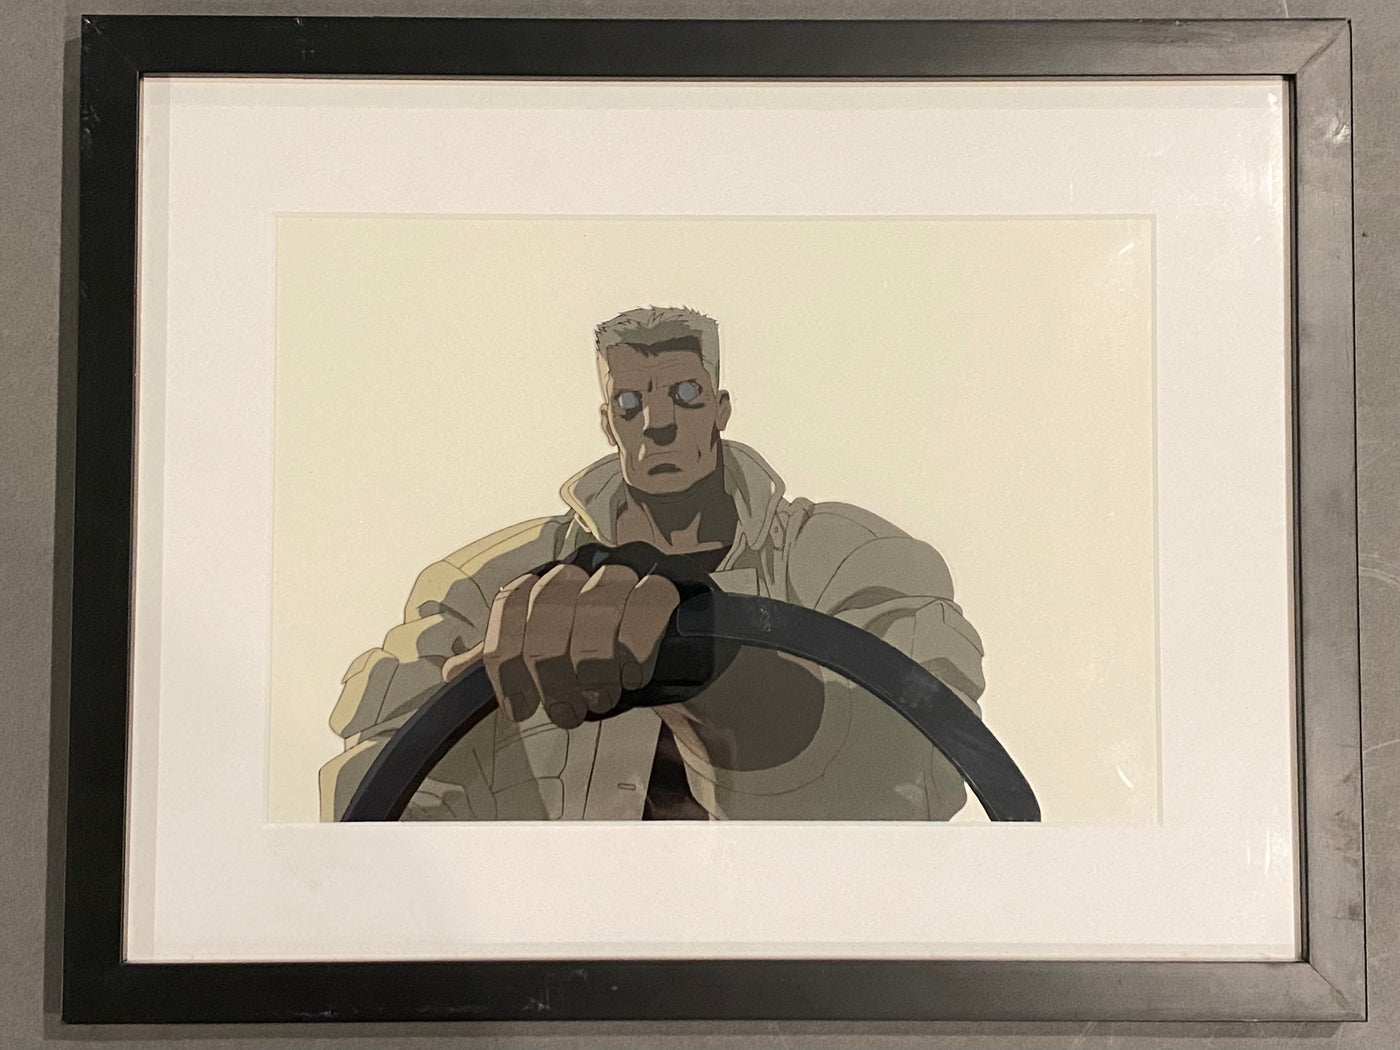 Original Masamune Shirow Production I.G. Production Cel of Batou Buttetsu from Ghost in the Shell (1995)